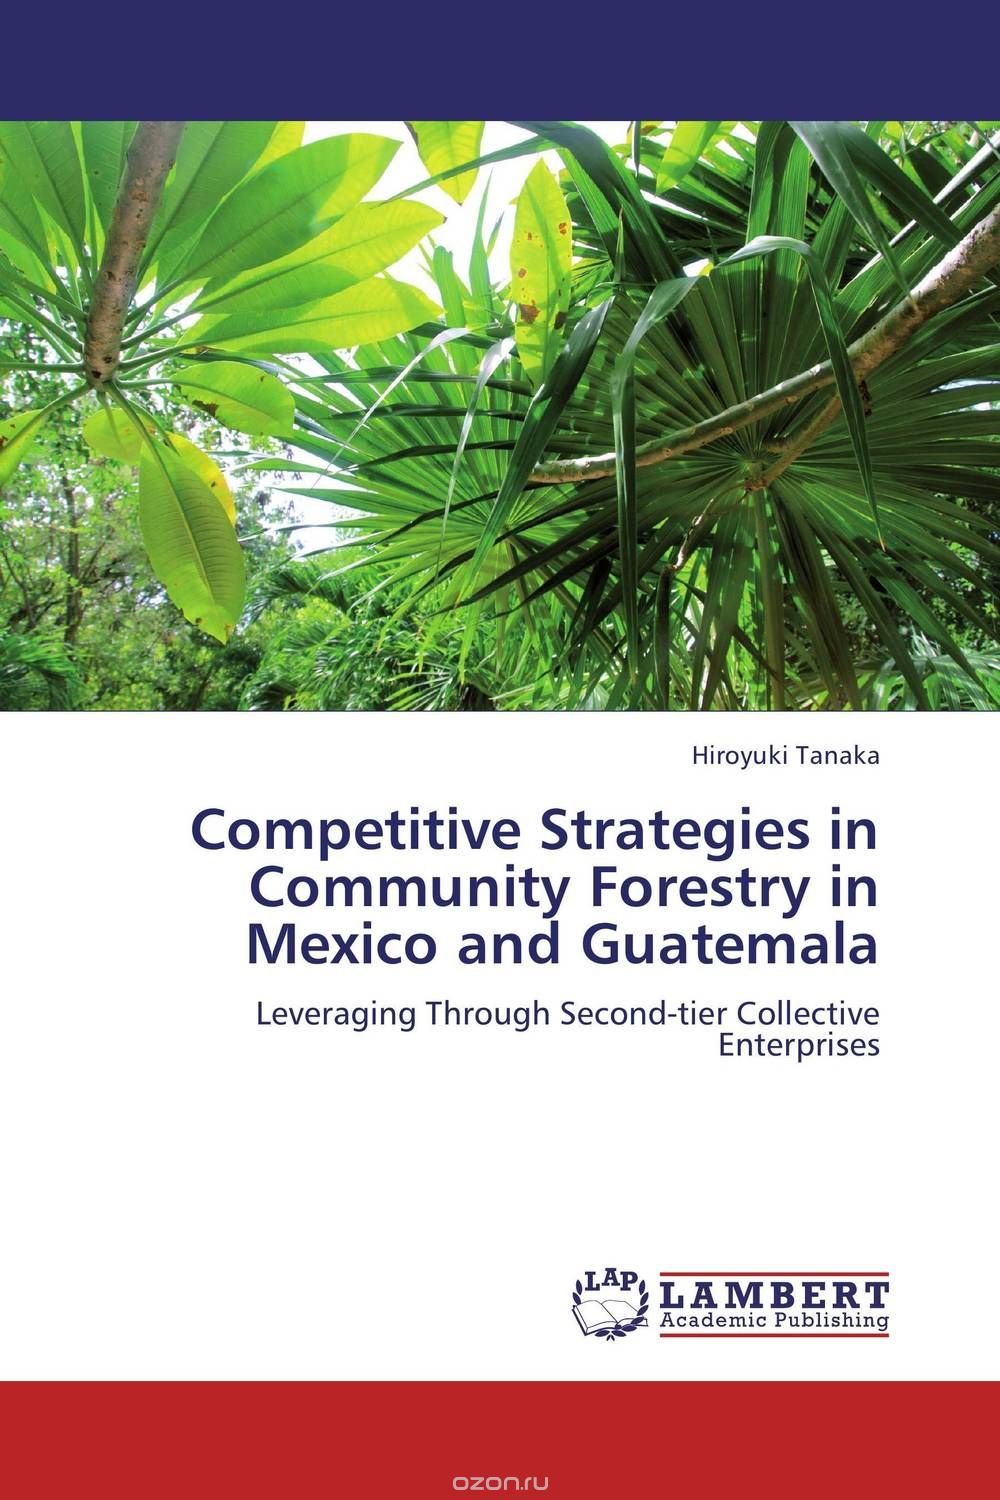 Скачать книгу "Competitive Strategies in Community Forestry in Mexico and Guatemala"